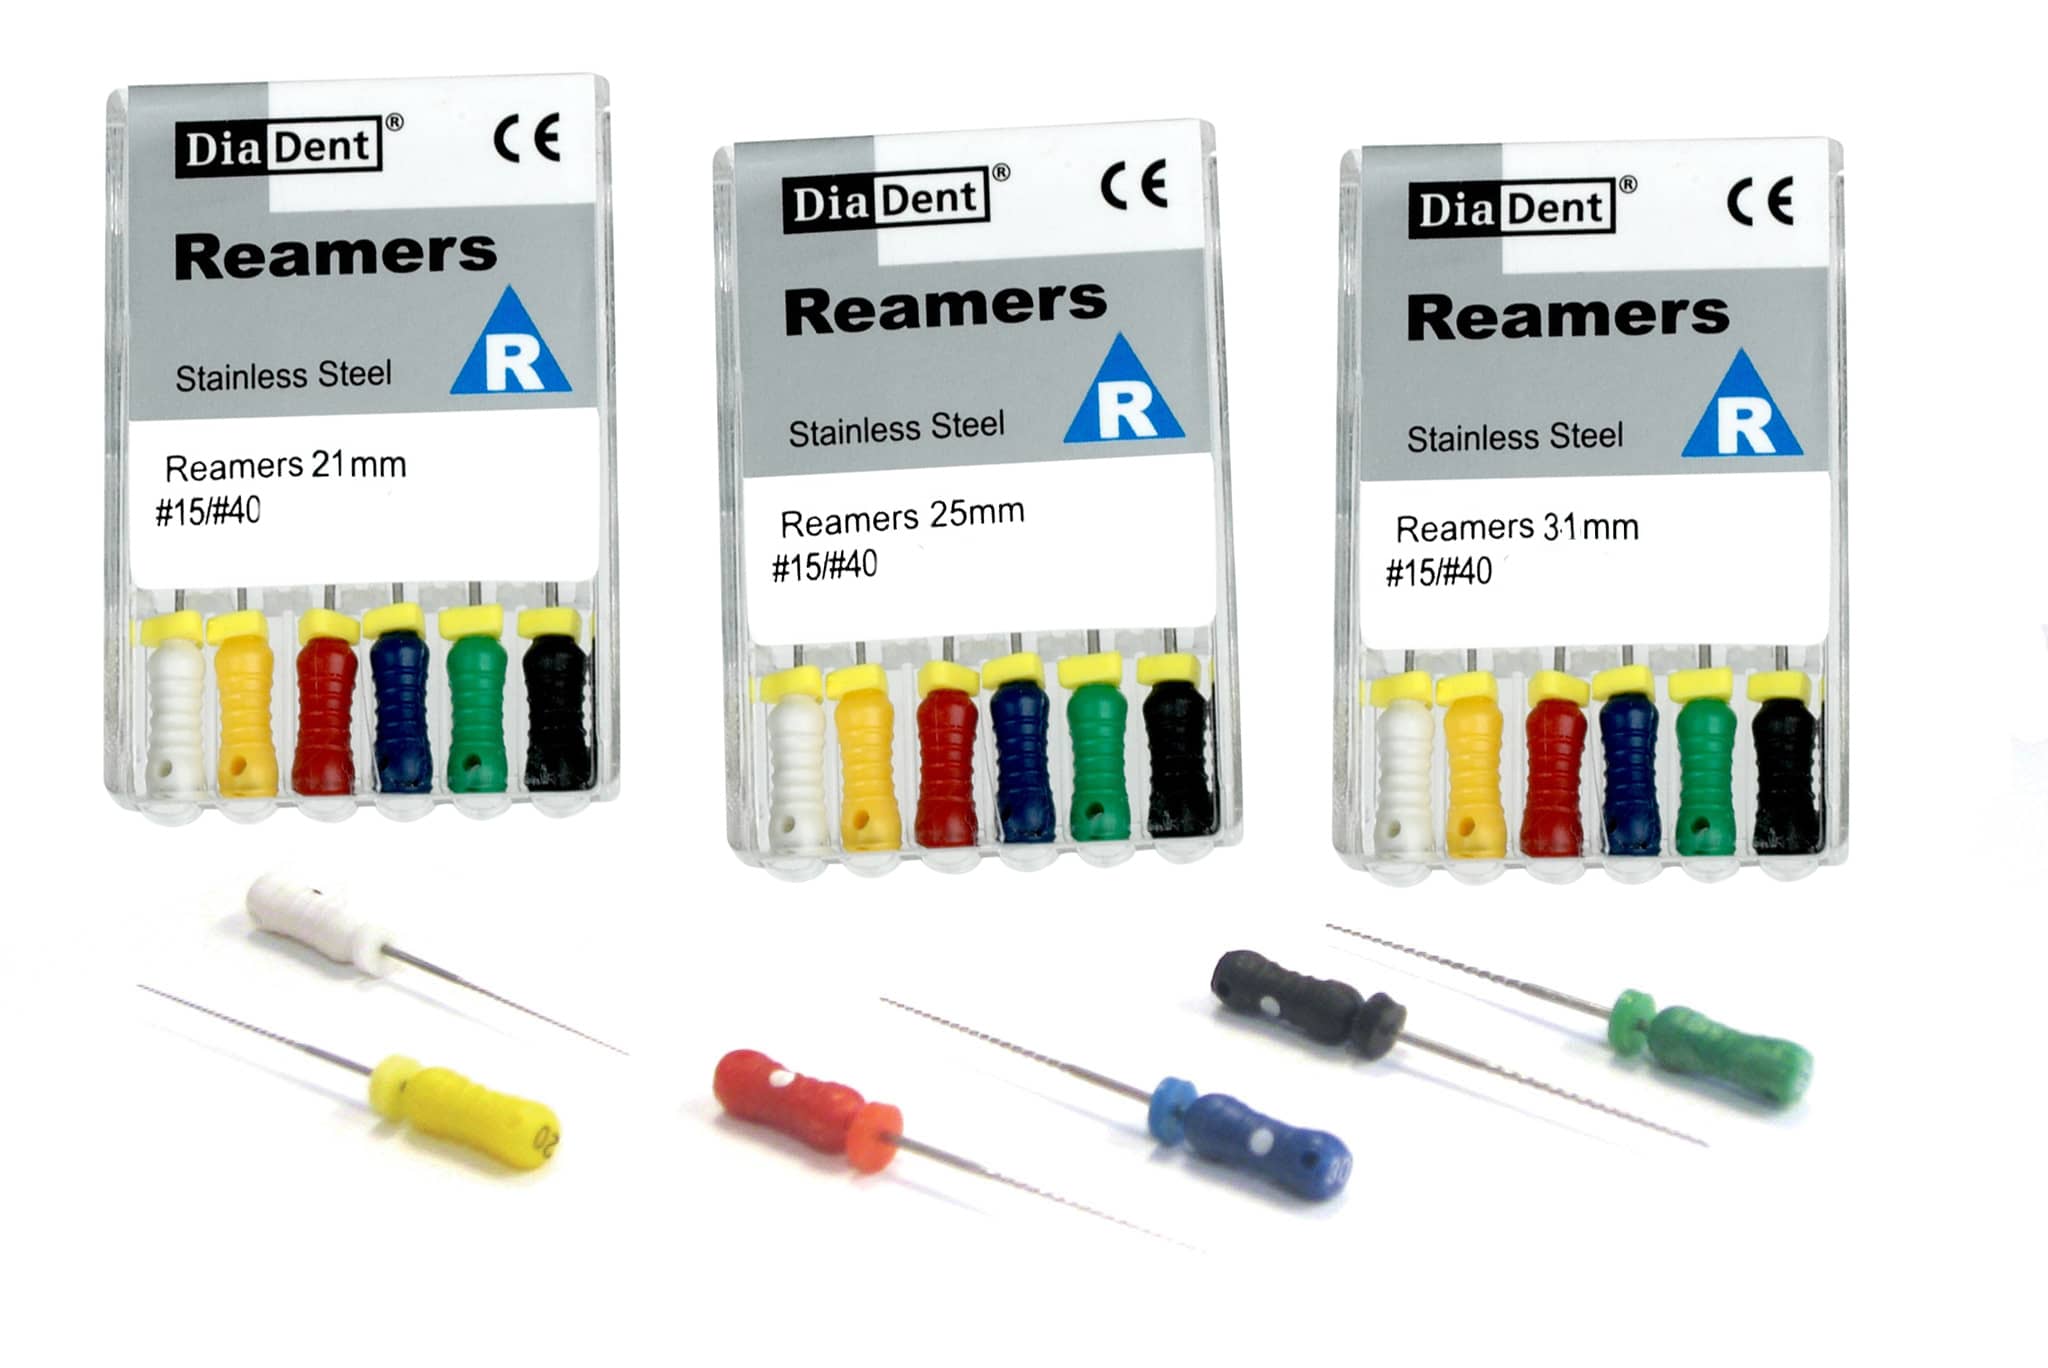 REAMERS Diadent 21mm - 20